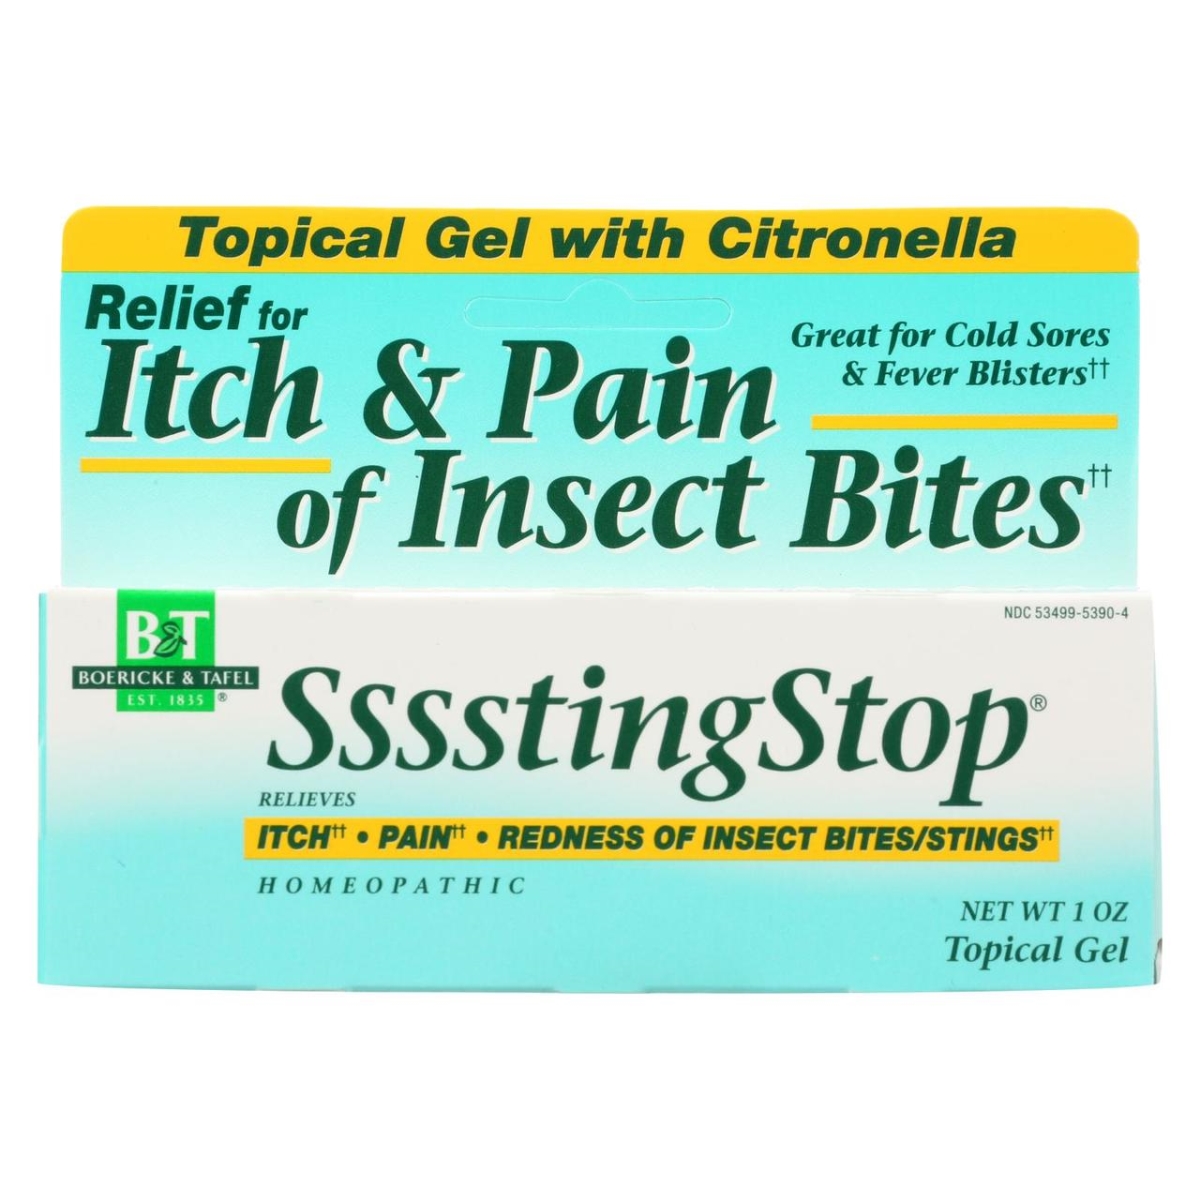 Picture of Boericke & Tafel HG0540641 1 oz Sssstingstop Topical Gel with Citronella Itch & Pain of Insect Bites